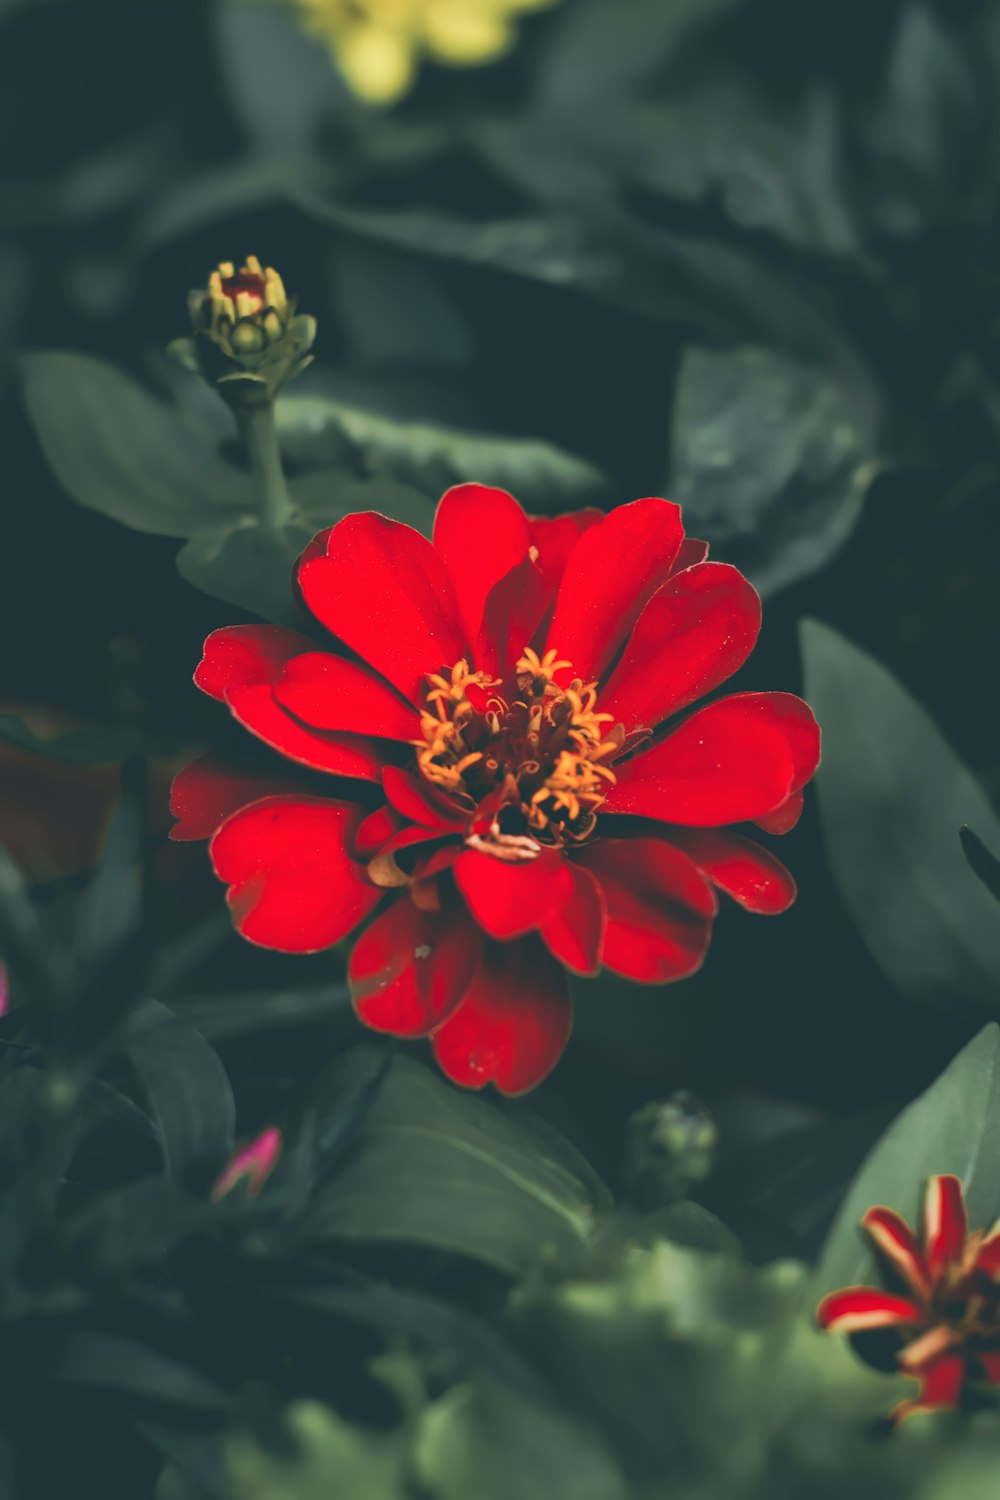 a close up of a red flower surrounded by green leaves